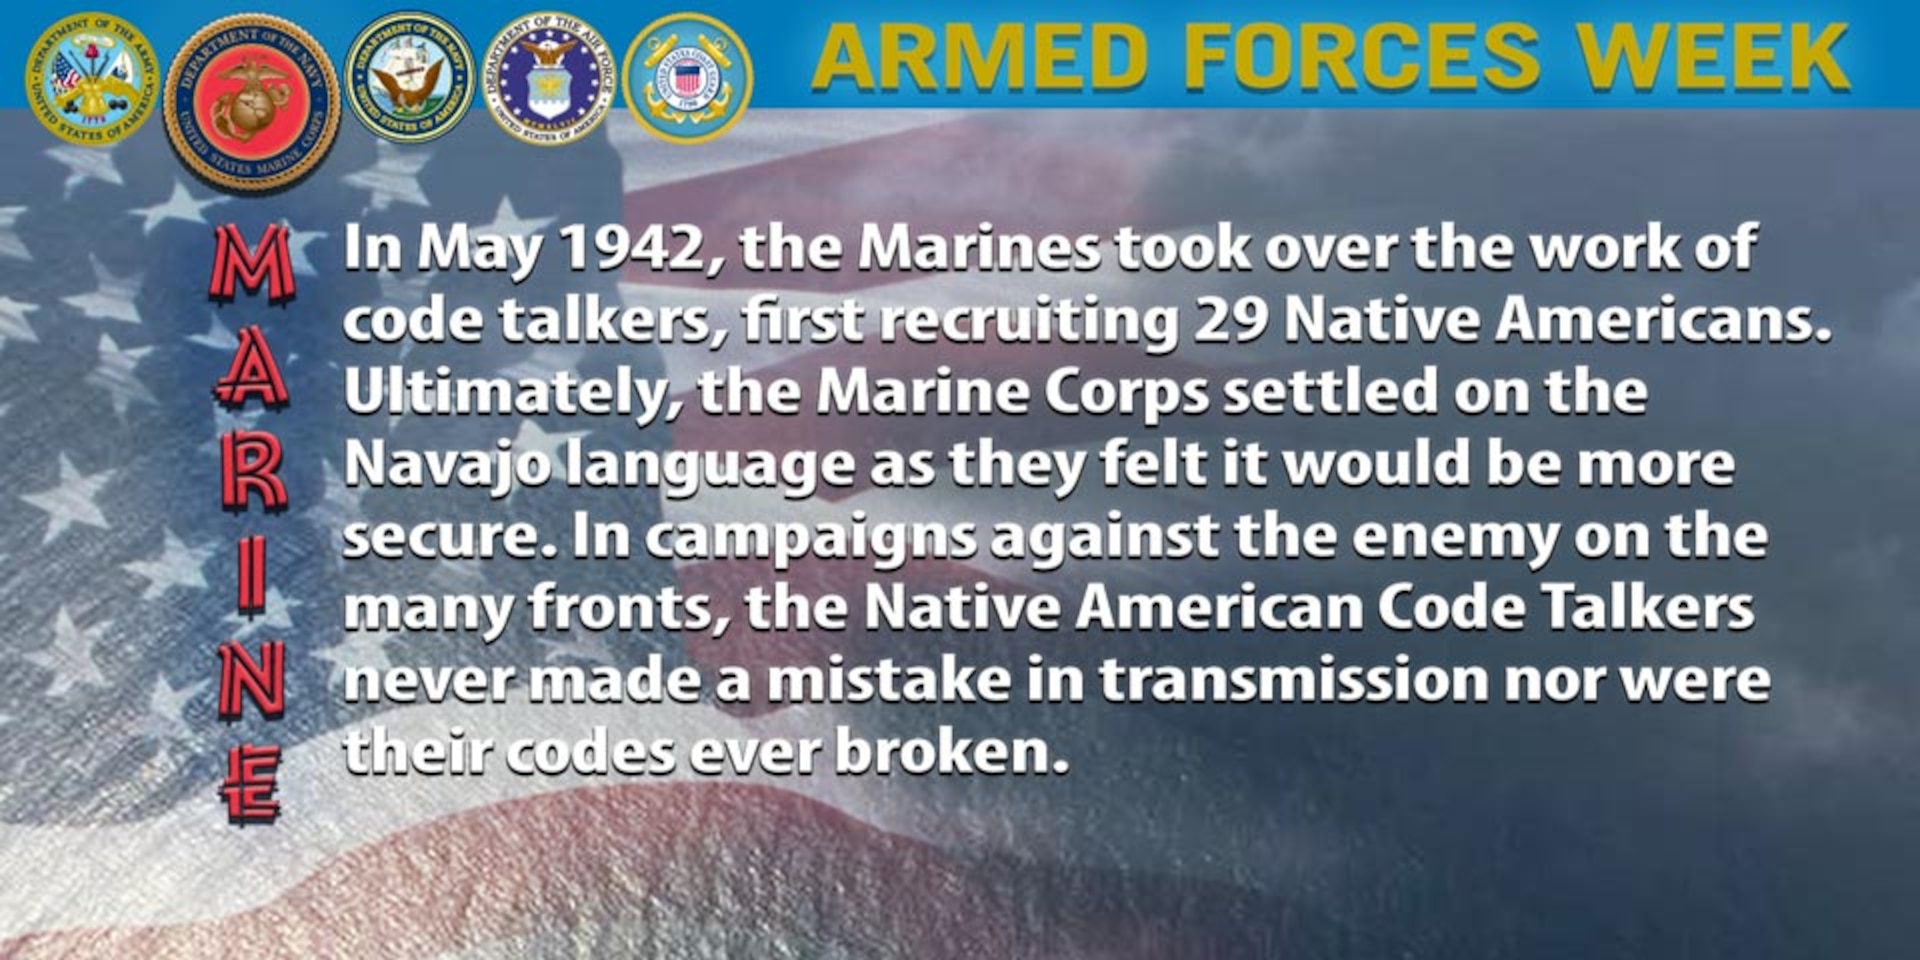 In May 1942, the Marines took over the work of code talkers, first recruiting 29 Native Americans. Ultimately, the Marine Corps settled on the Navajo language as they felt it would be more secure. In campaigns against the enemy on the many fronts, the Native American Code Talkers never made a mistake in transmission nor were their codes ever broken.